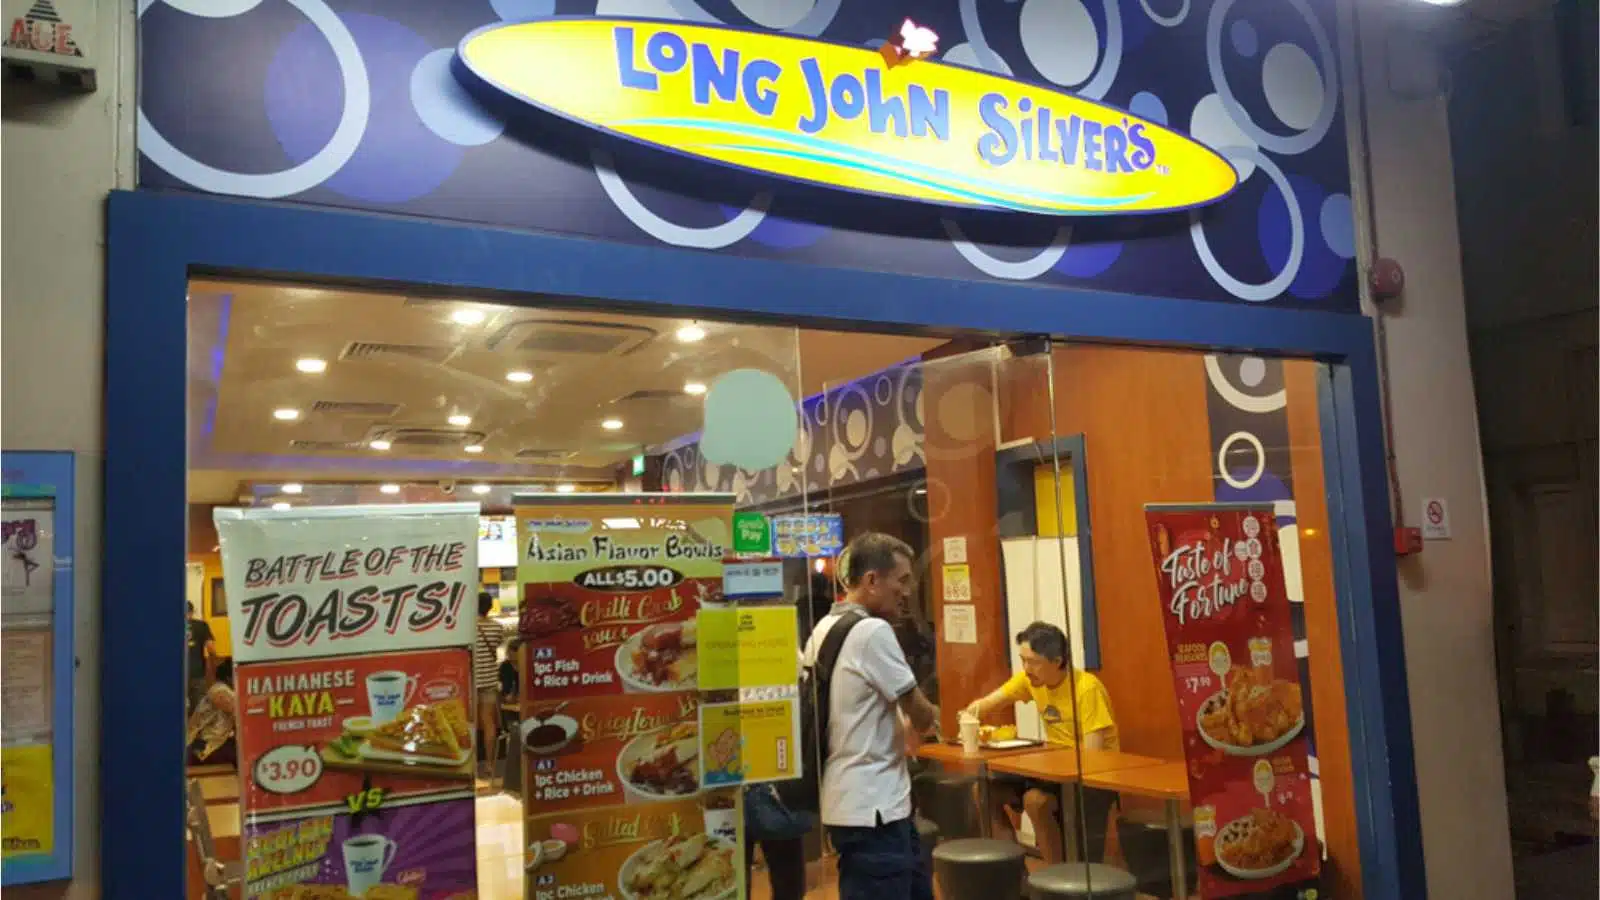 Singapore , Singapore - Feb 5 2019: Long John Silver's LLC is an American fast food restaurant chain that specializes in seafood. The brand's name is derived from the novel Treasure Island